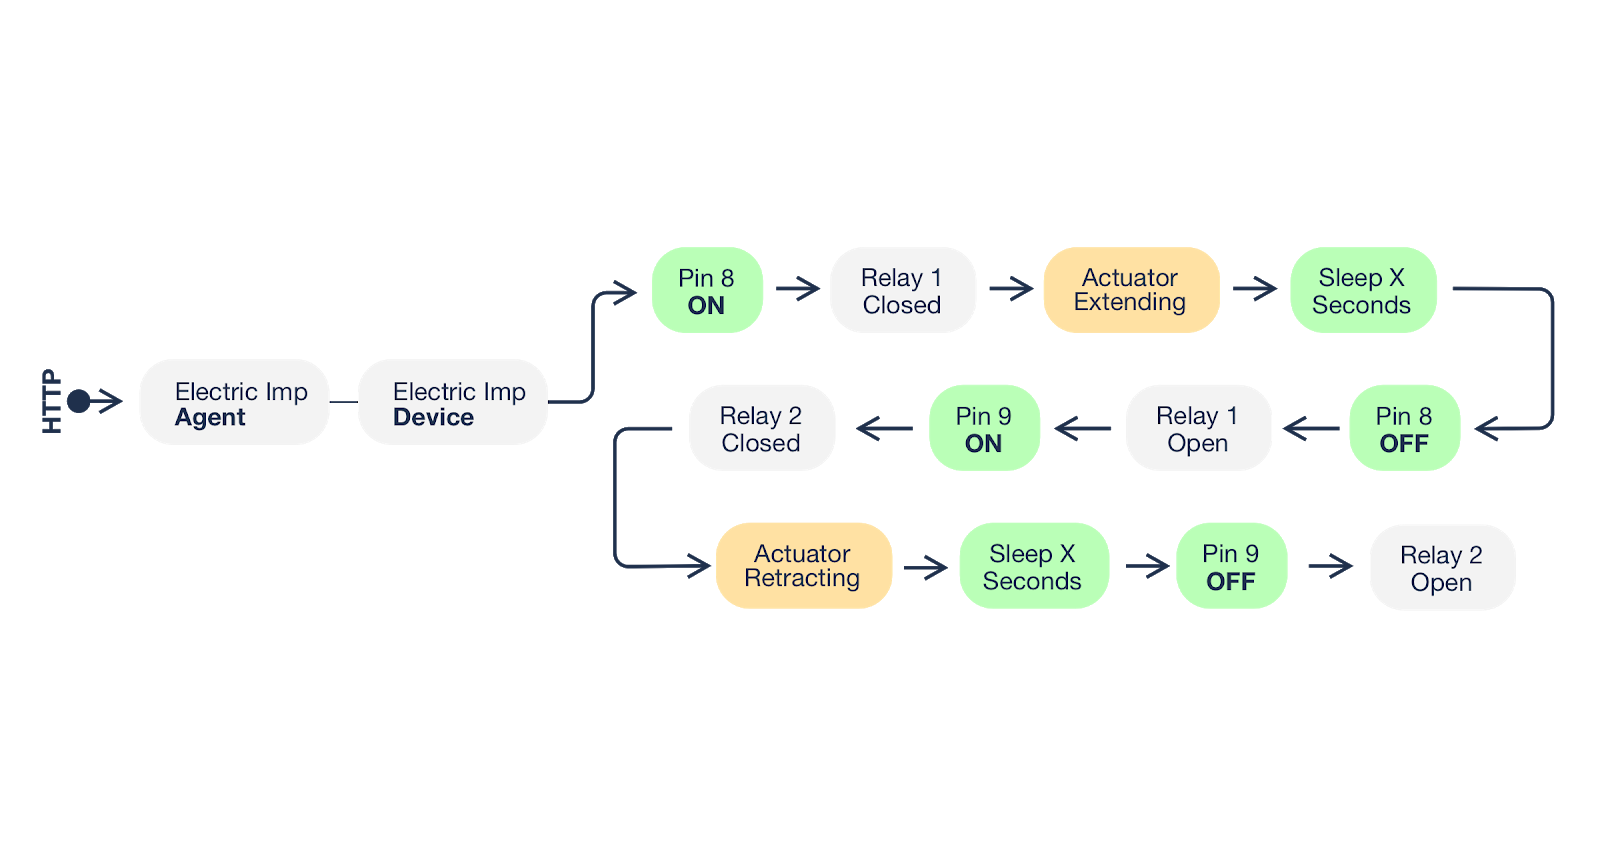 Flowchart of how an HTTP request sets off the Candybot actuator